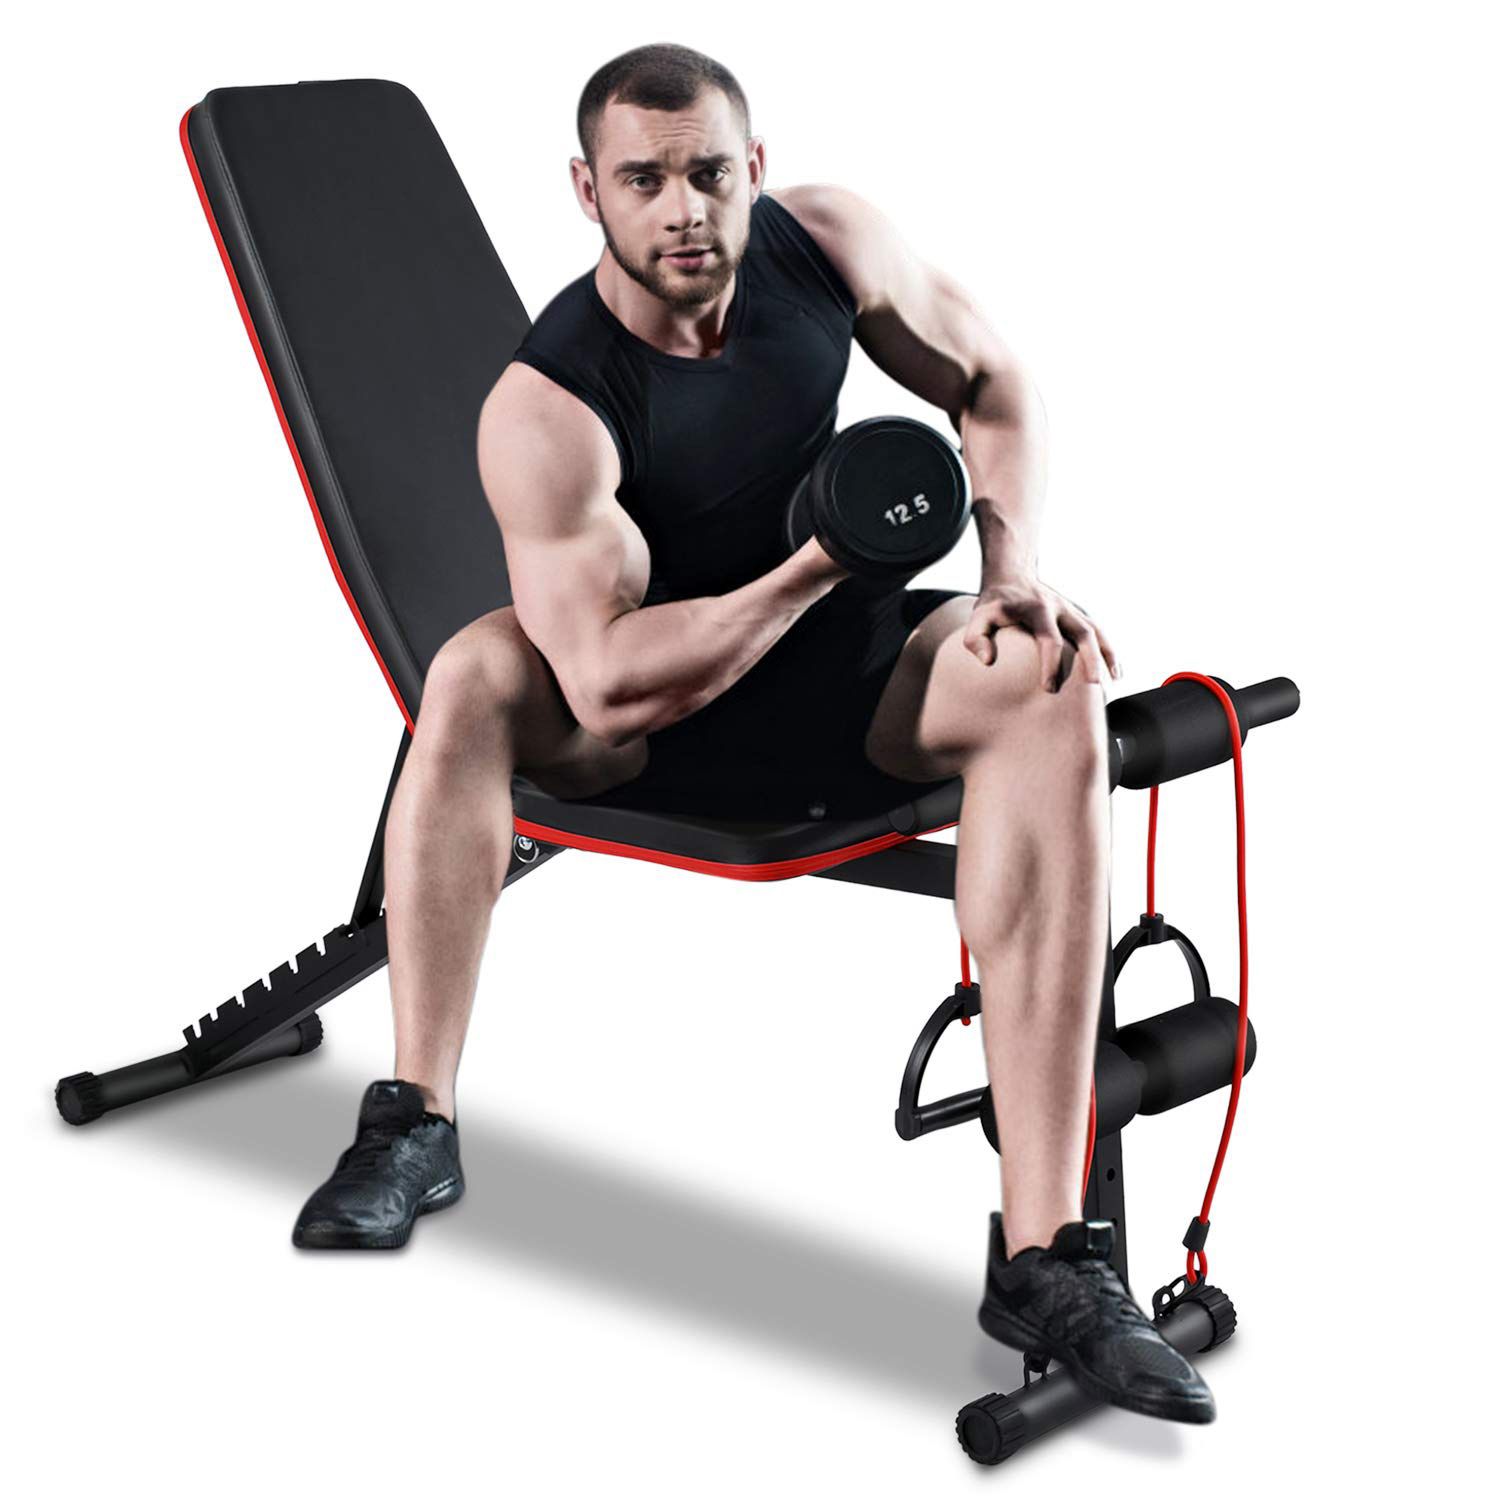 🎉 BRAND NEW Adjustable Weight Bench Workout Bench Sit Up Incline Curved Bench Flat Fly Weight Press Foldable Multi-Purpose Bench with Resistance Band